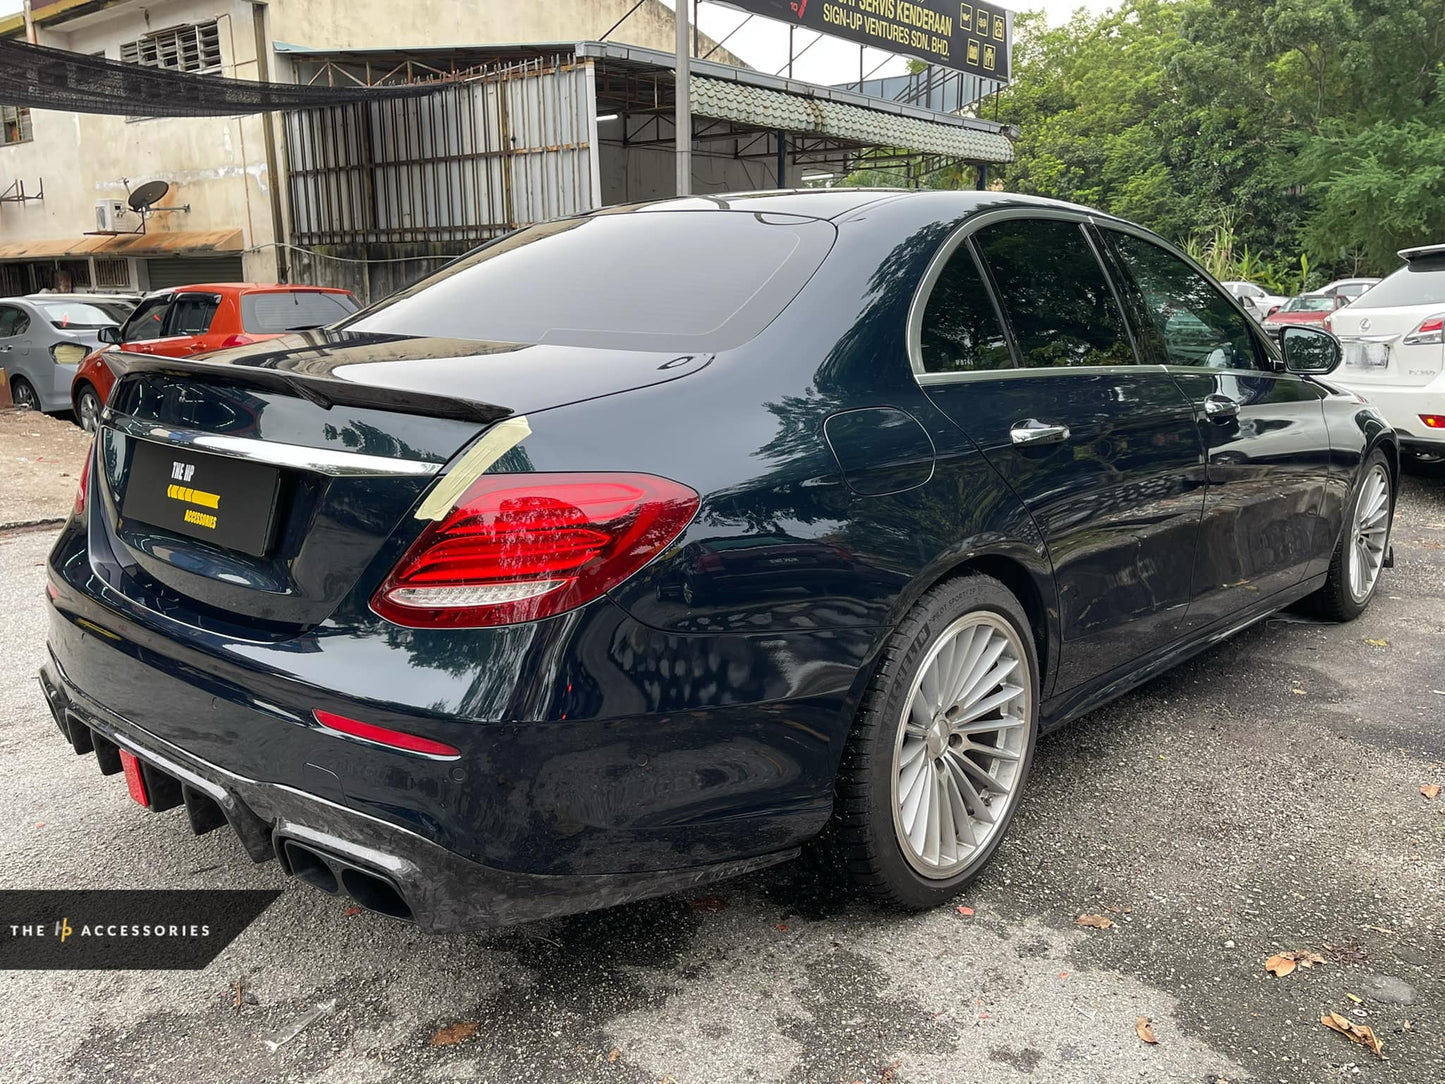 Mercedes E63 Bodykit with BRABUS Add On Kit